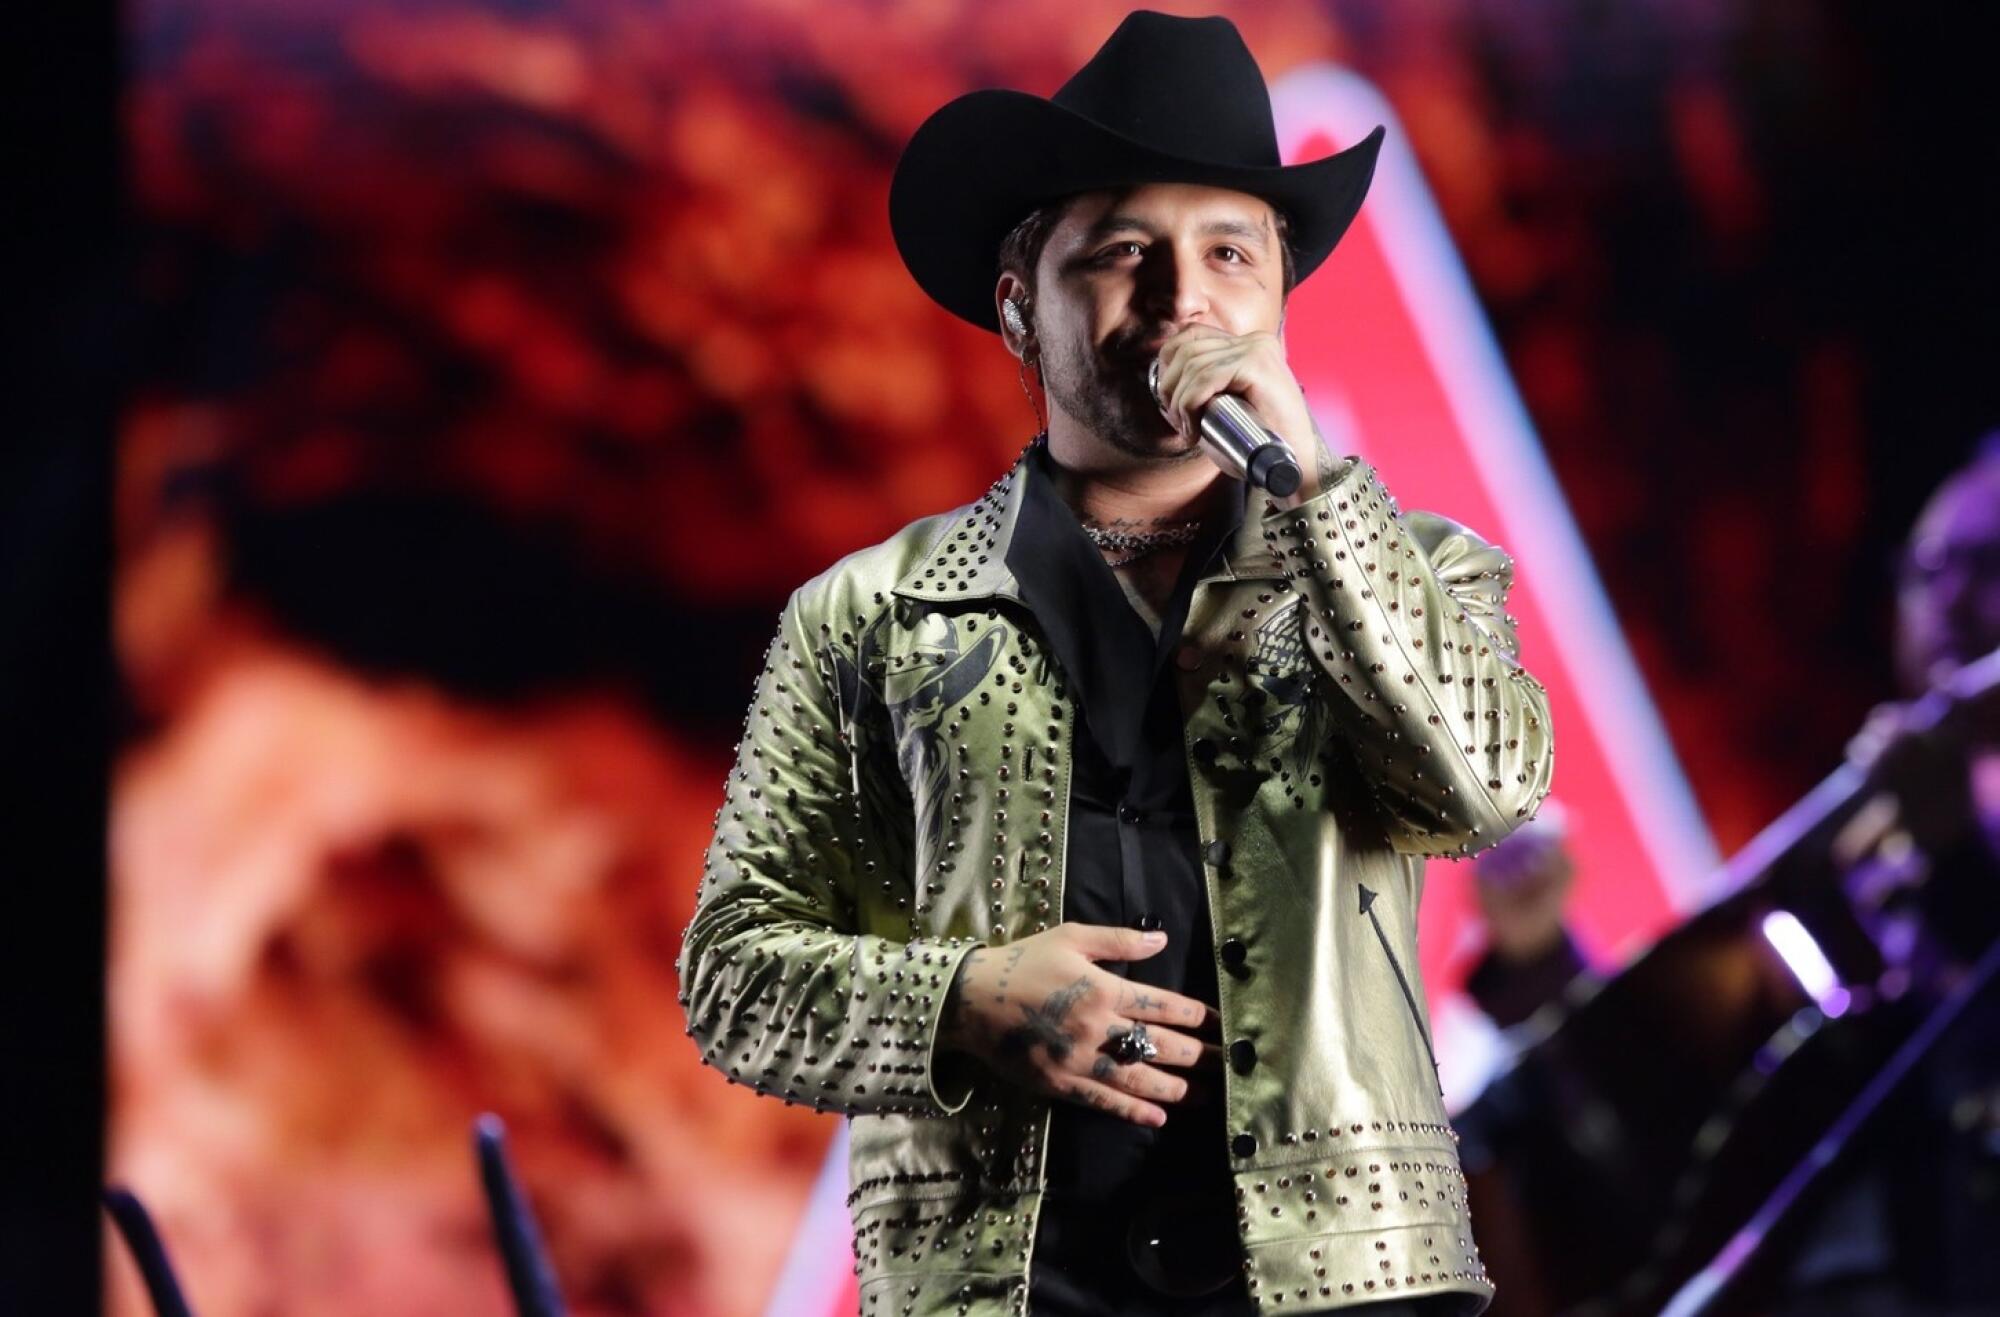 Christian Nodal performs in a black cowboy hat.